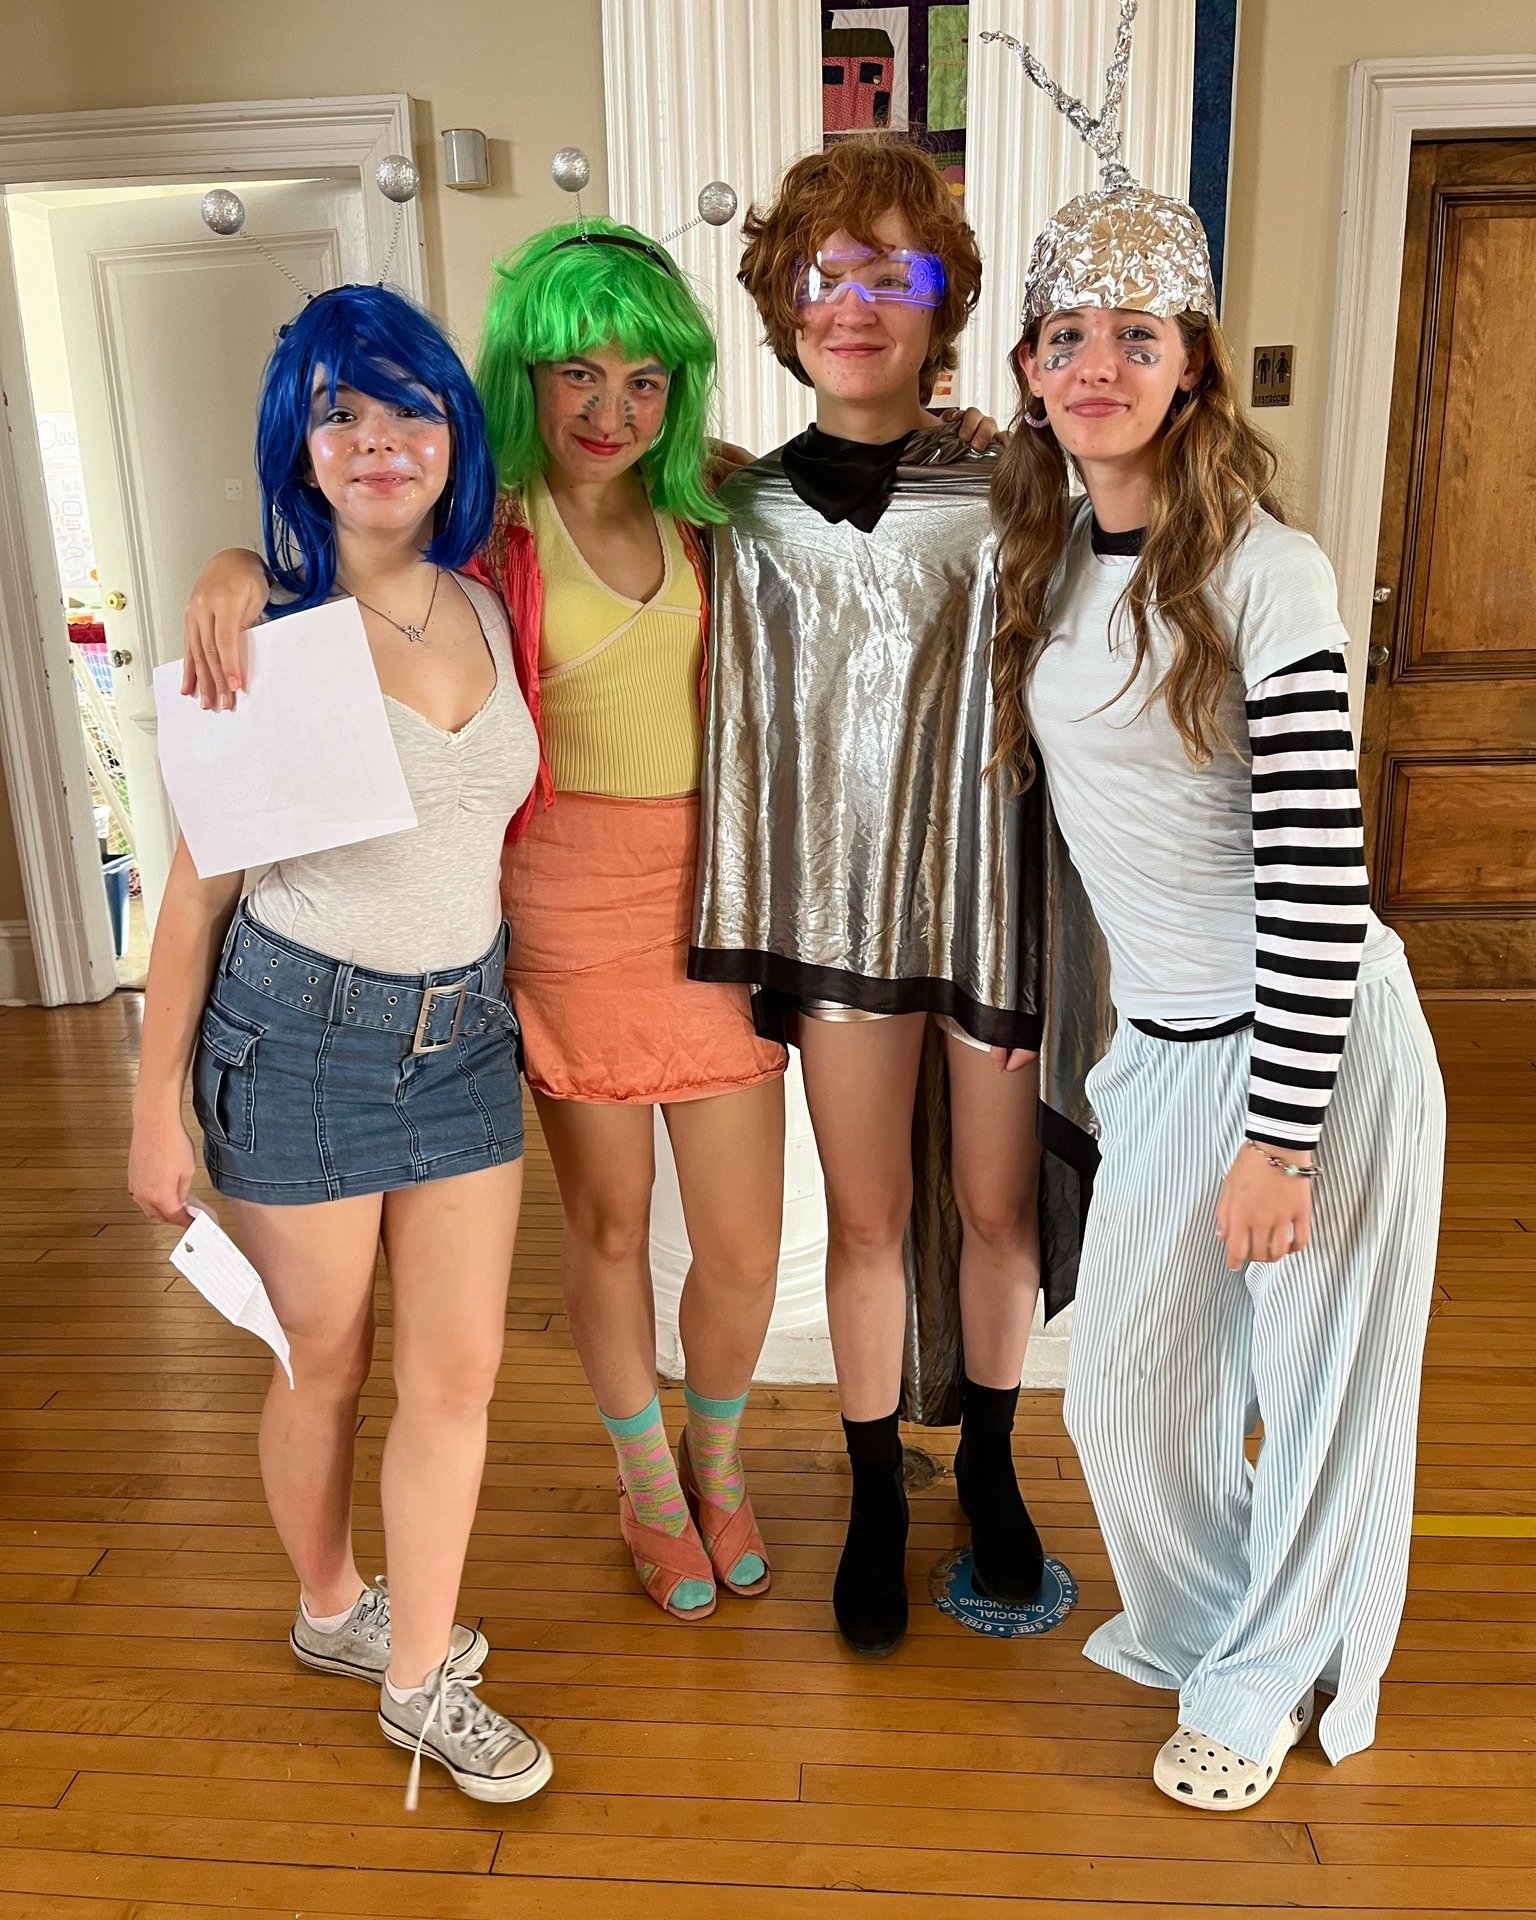 We got a glimpse of what's ahead as Futuristic Friday kicked off the dress-up days that will continue during Spirit Week next week. Some students went sleek and high-tech, while others portrayed their elderly selves. The creativity has just begun!